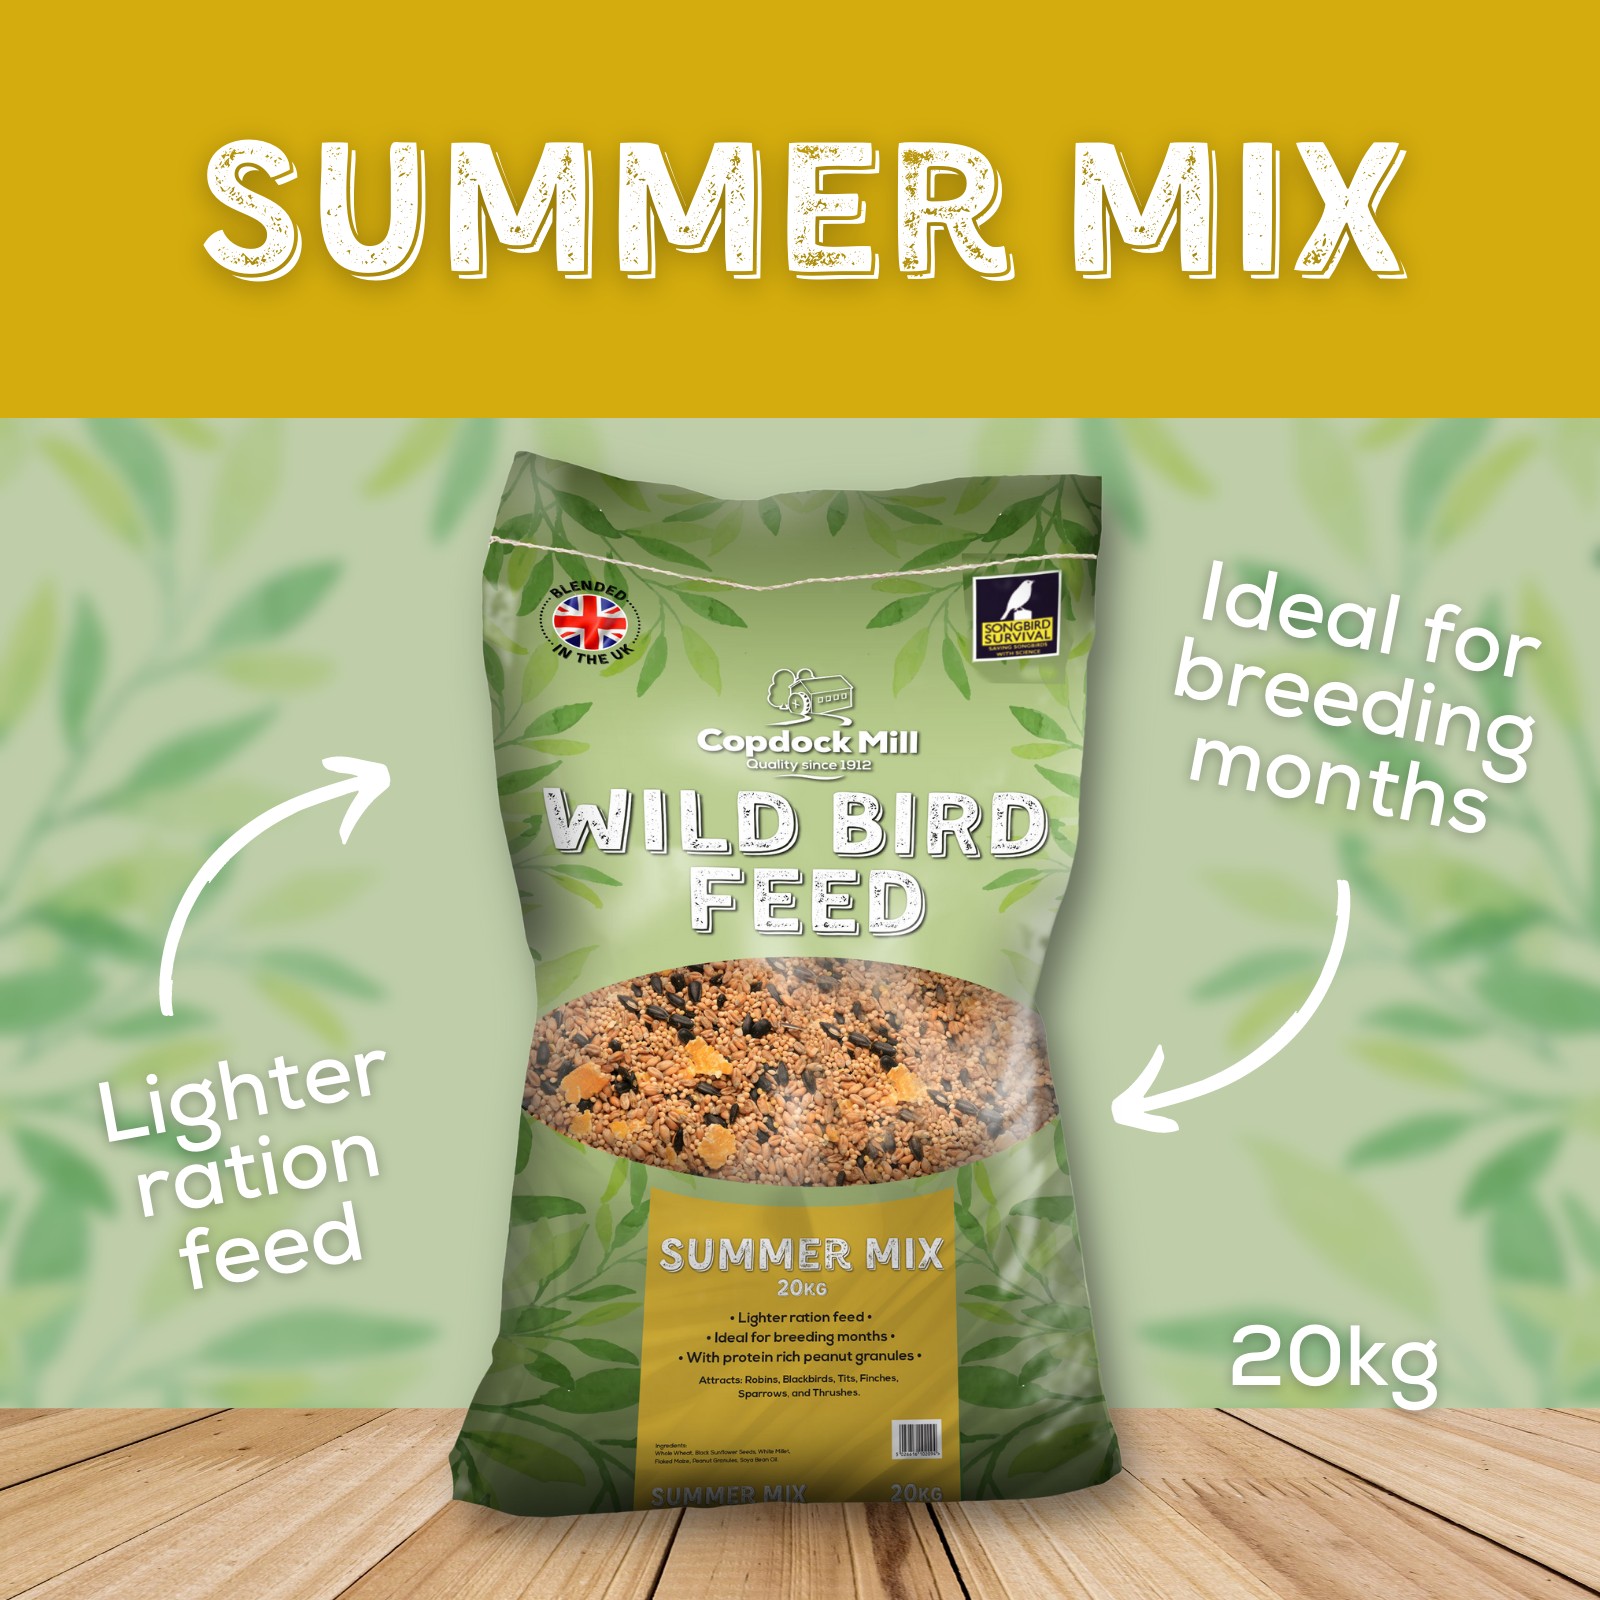 Summer Mix: Lighter ration feed, ideal for breeding months